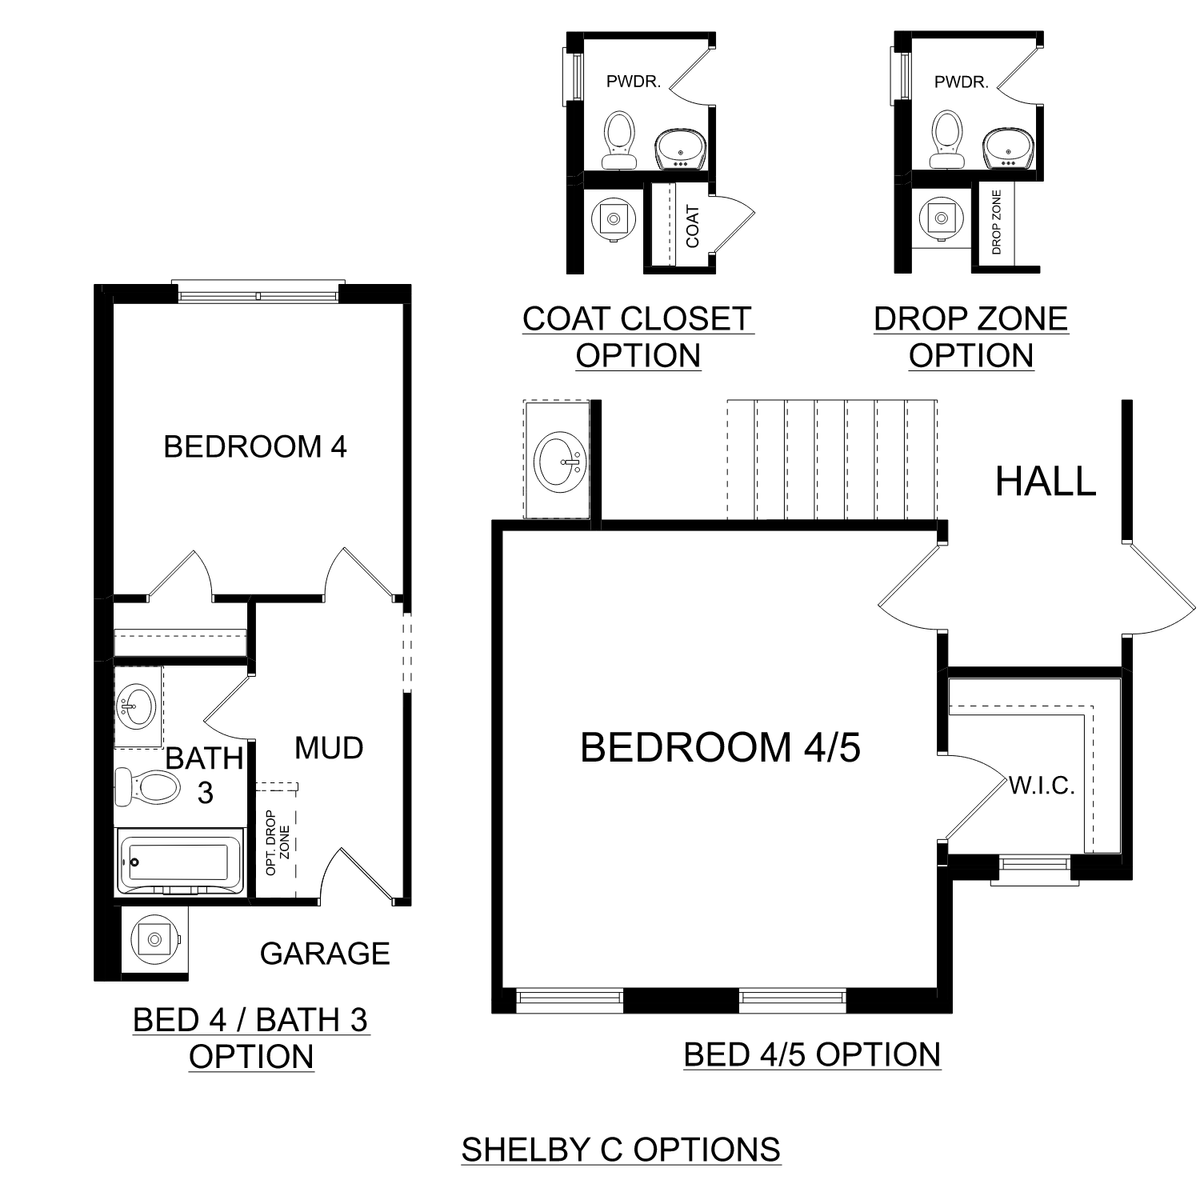 3 - The Shelby C buildable floor plan layout in Davidson Homes' Wood Trail community.